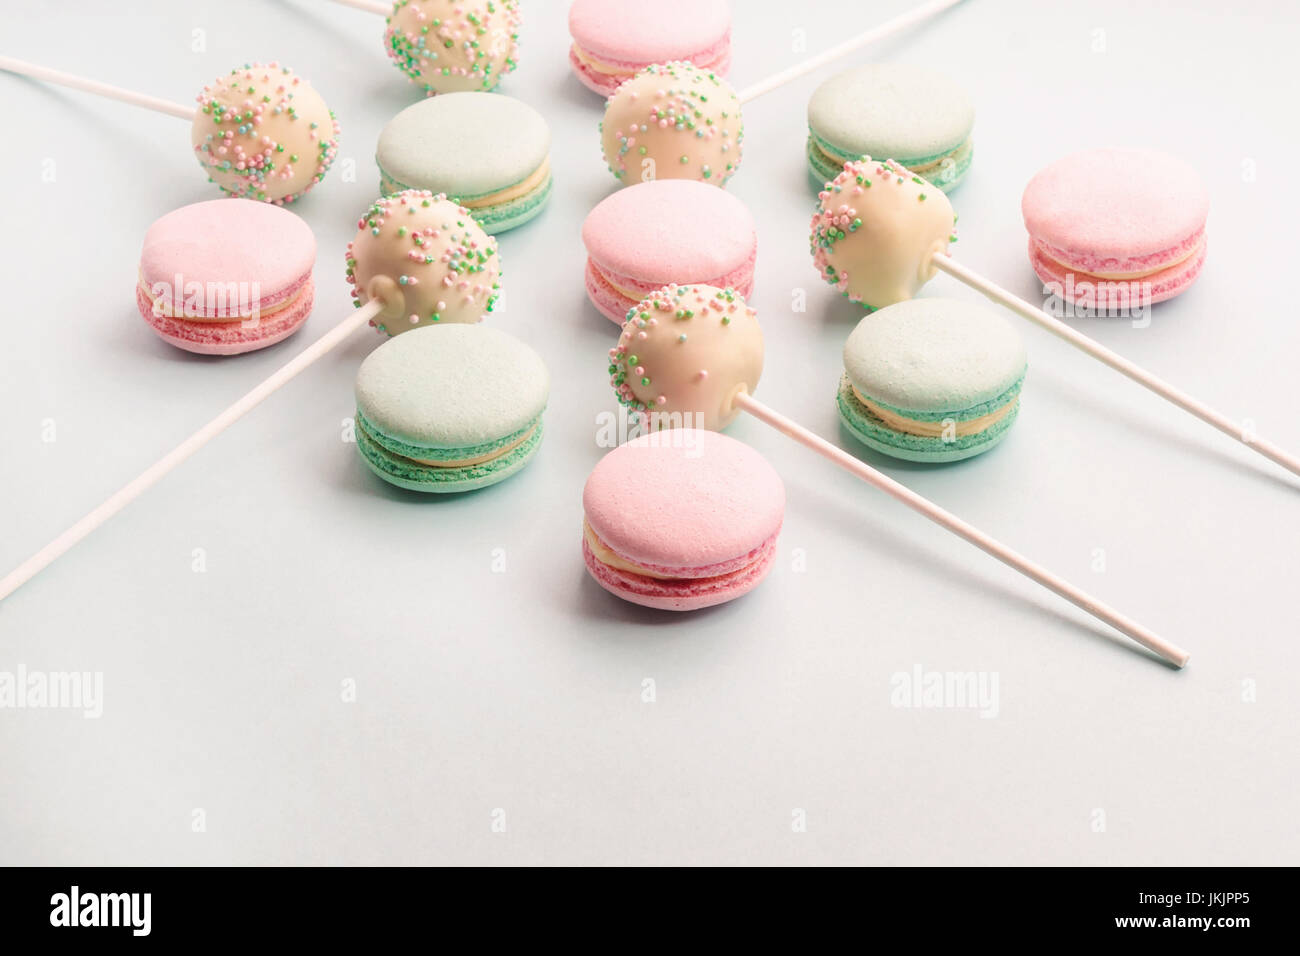 Sweet macarons and cake pops assortment Stock Photo